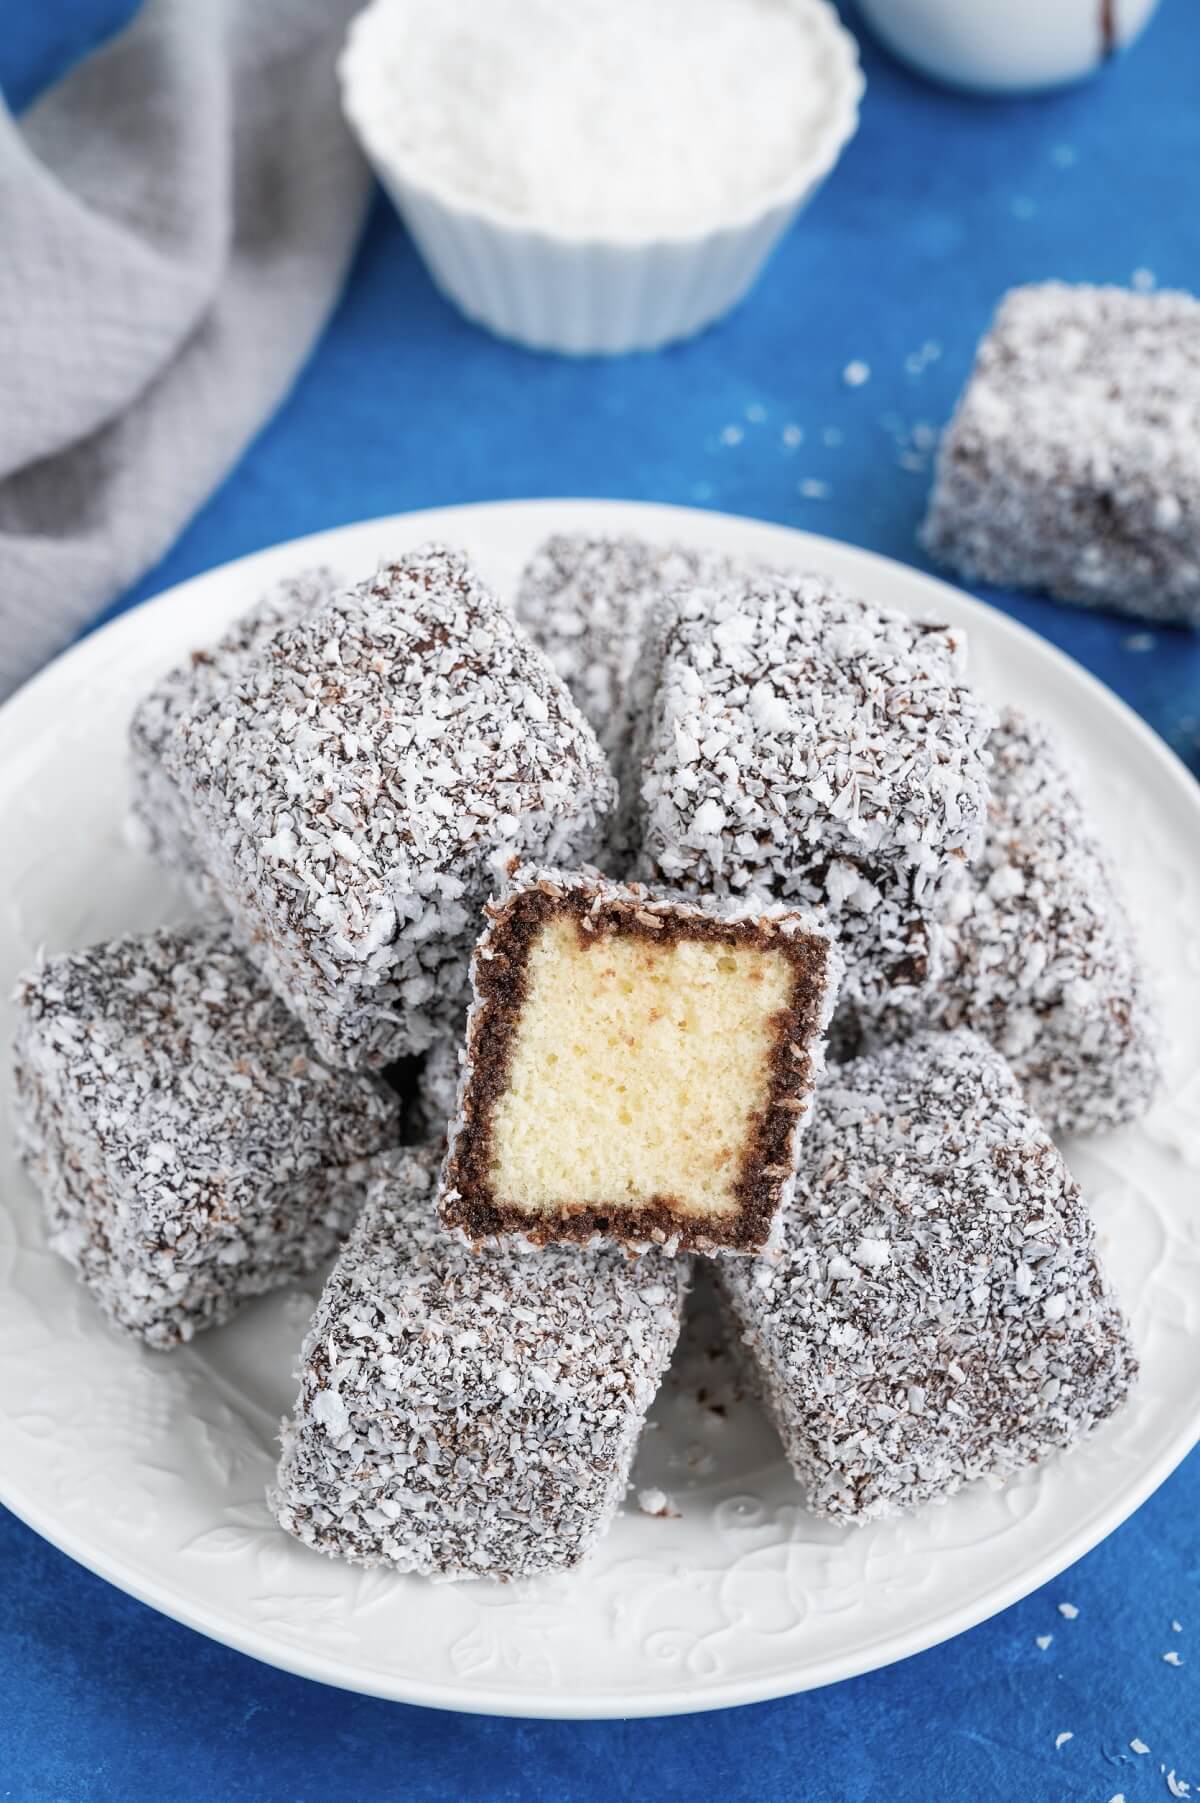 Lamington cake – a fragrant dessert rolled in chocolate and coconut